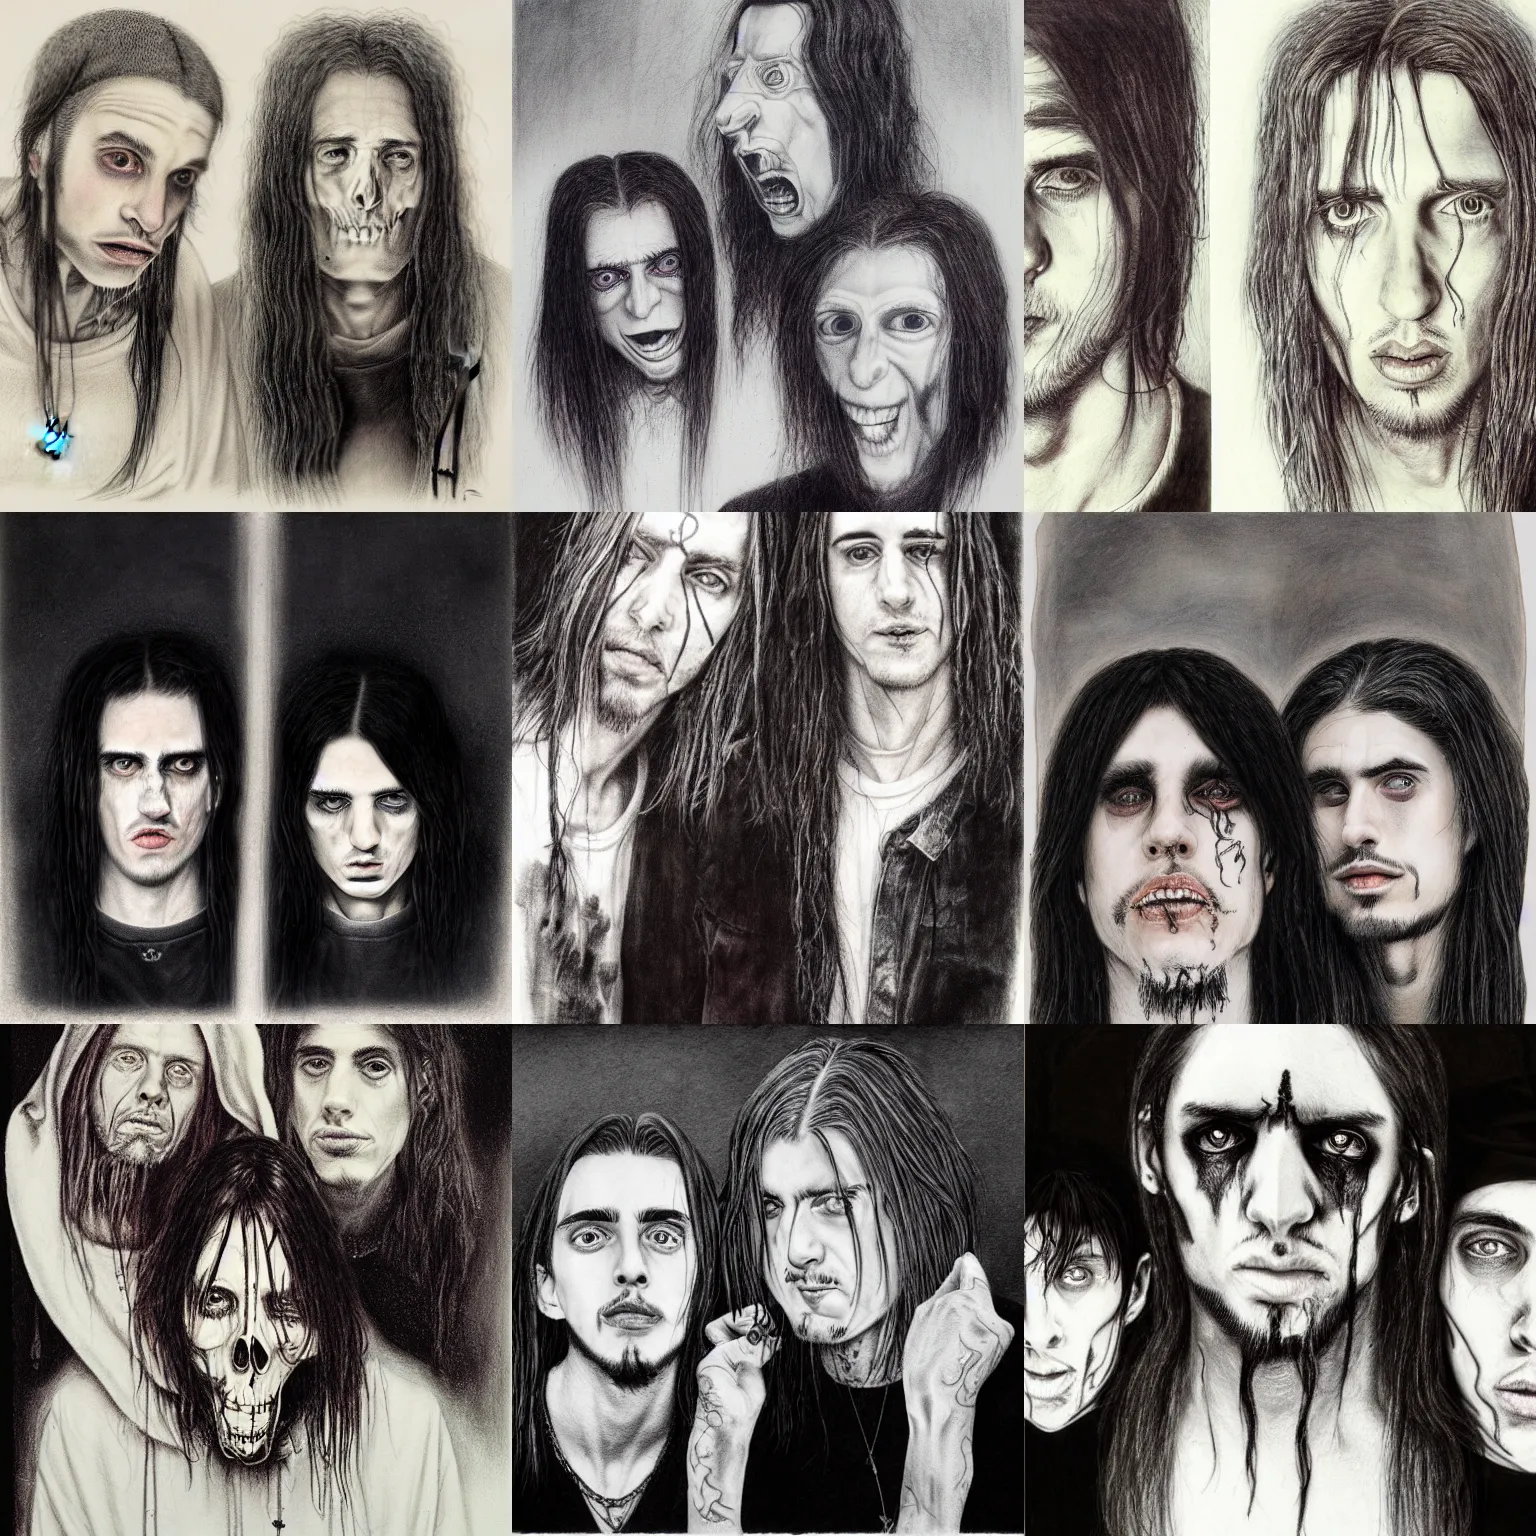 Prompt: a detailed portrait of teamsesh and ghostemane by stephen gammell